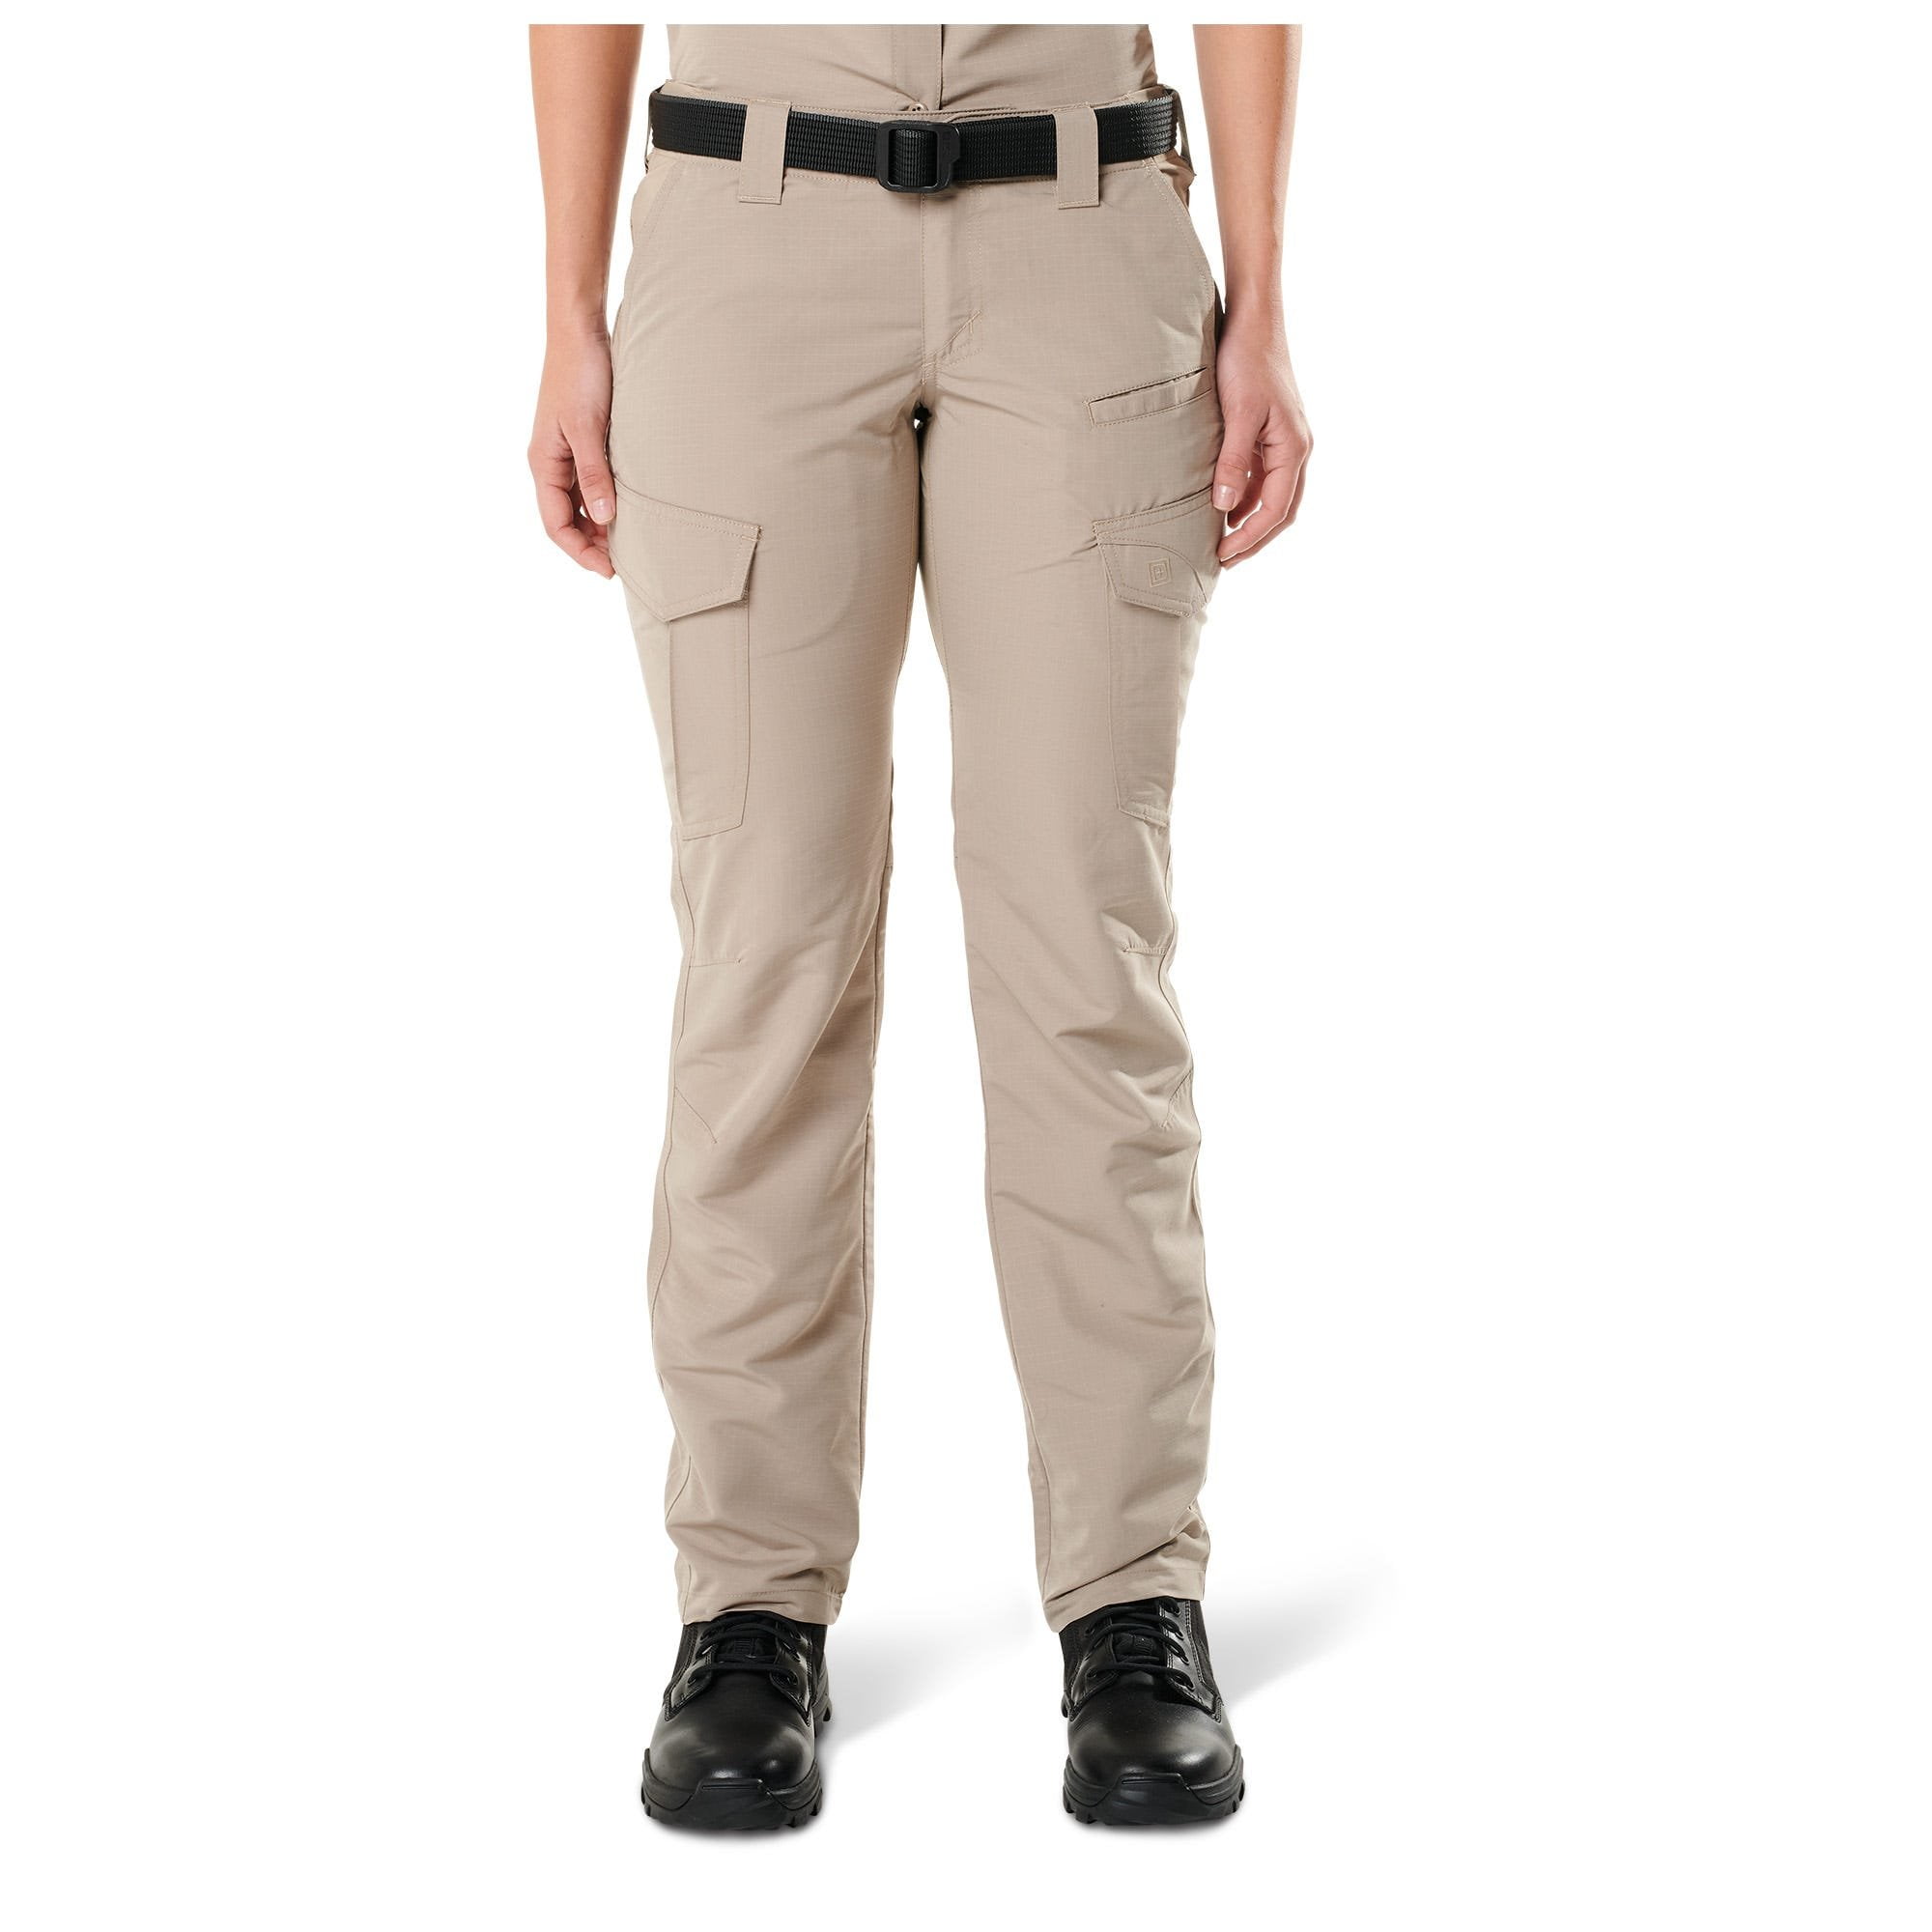 Polyester Ripstop Style 64419 5.11 Tactical Womens Fast-Tac Cargo Professional Uniform Pants 